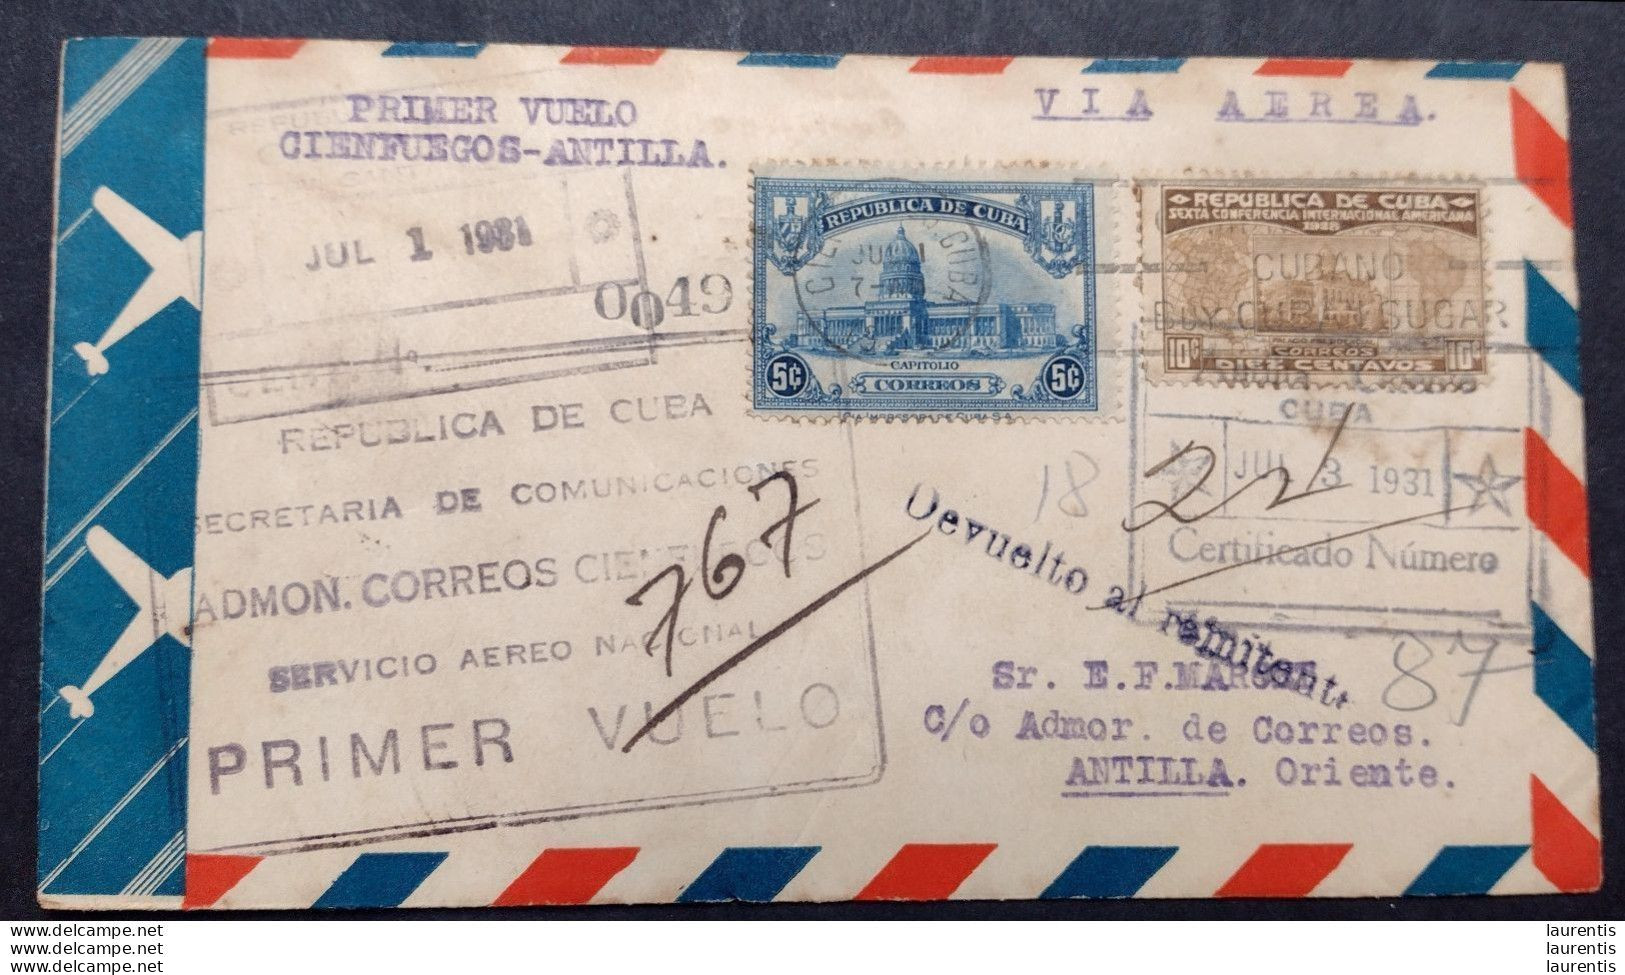 D575. First Flight Cienfuegos-Antilla - Registered On July 1st, 1931 - Only 14 Covers Are Known - 215,00 - Airmail